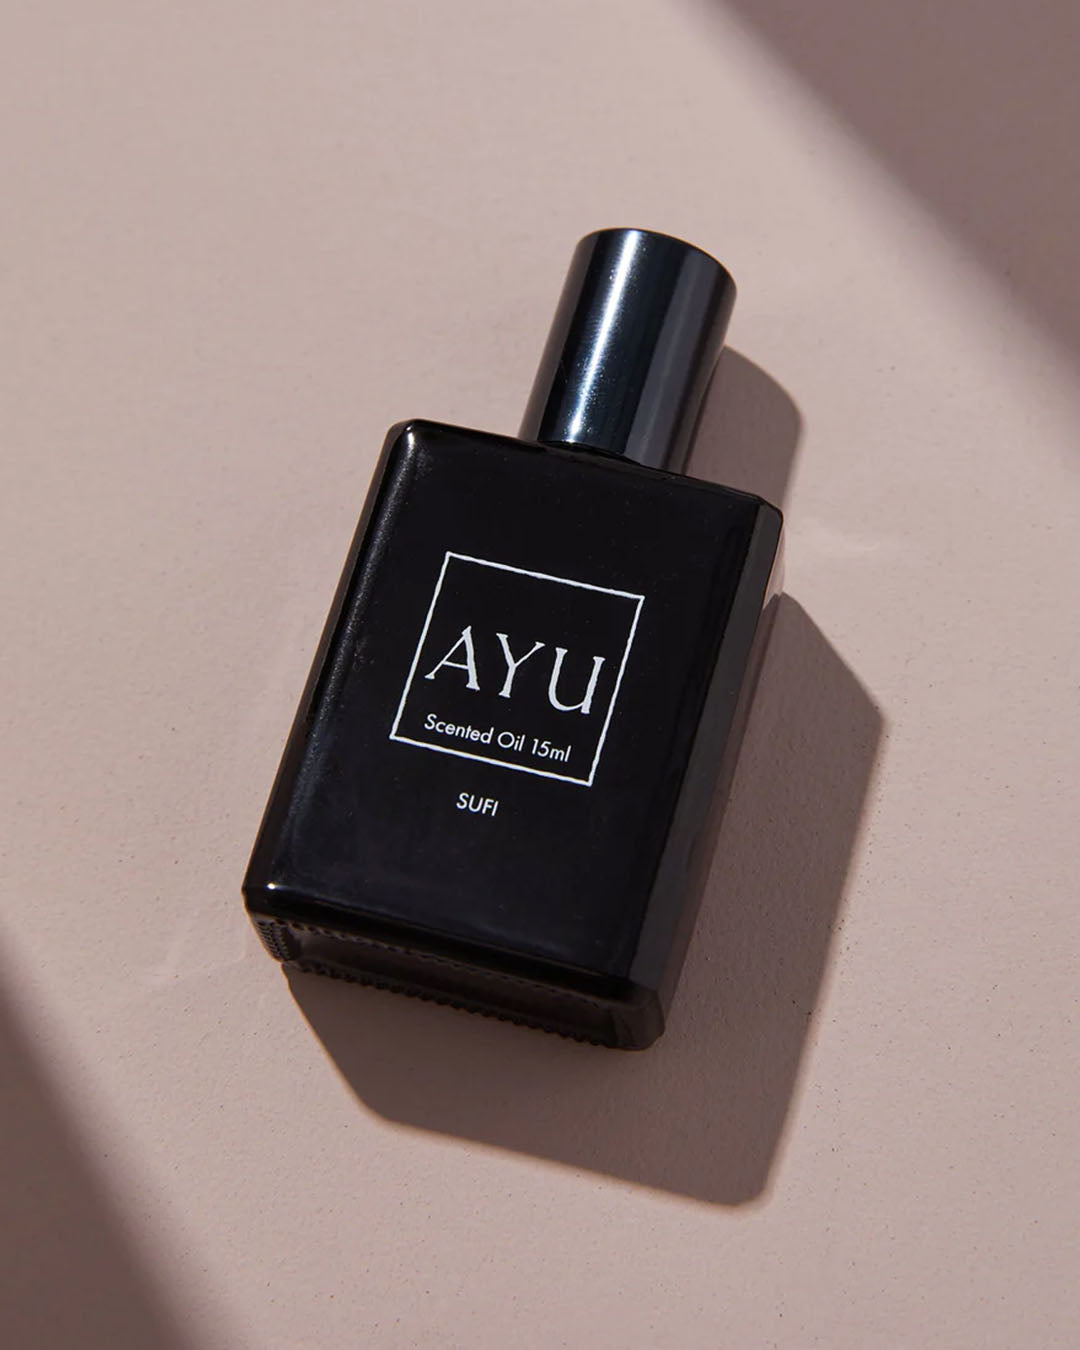 Scented Perfume Oil - Sufi Perfume by Ayu - Prae Store